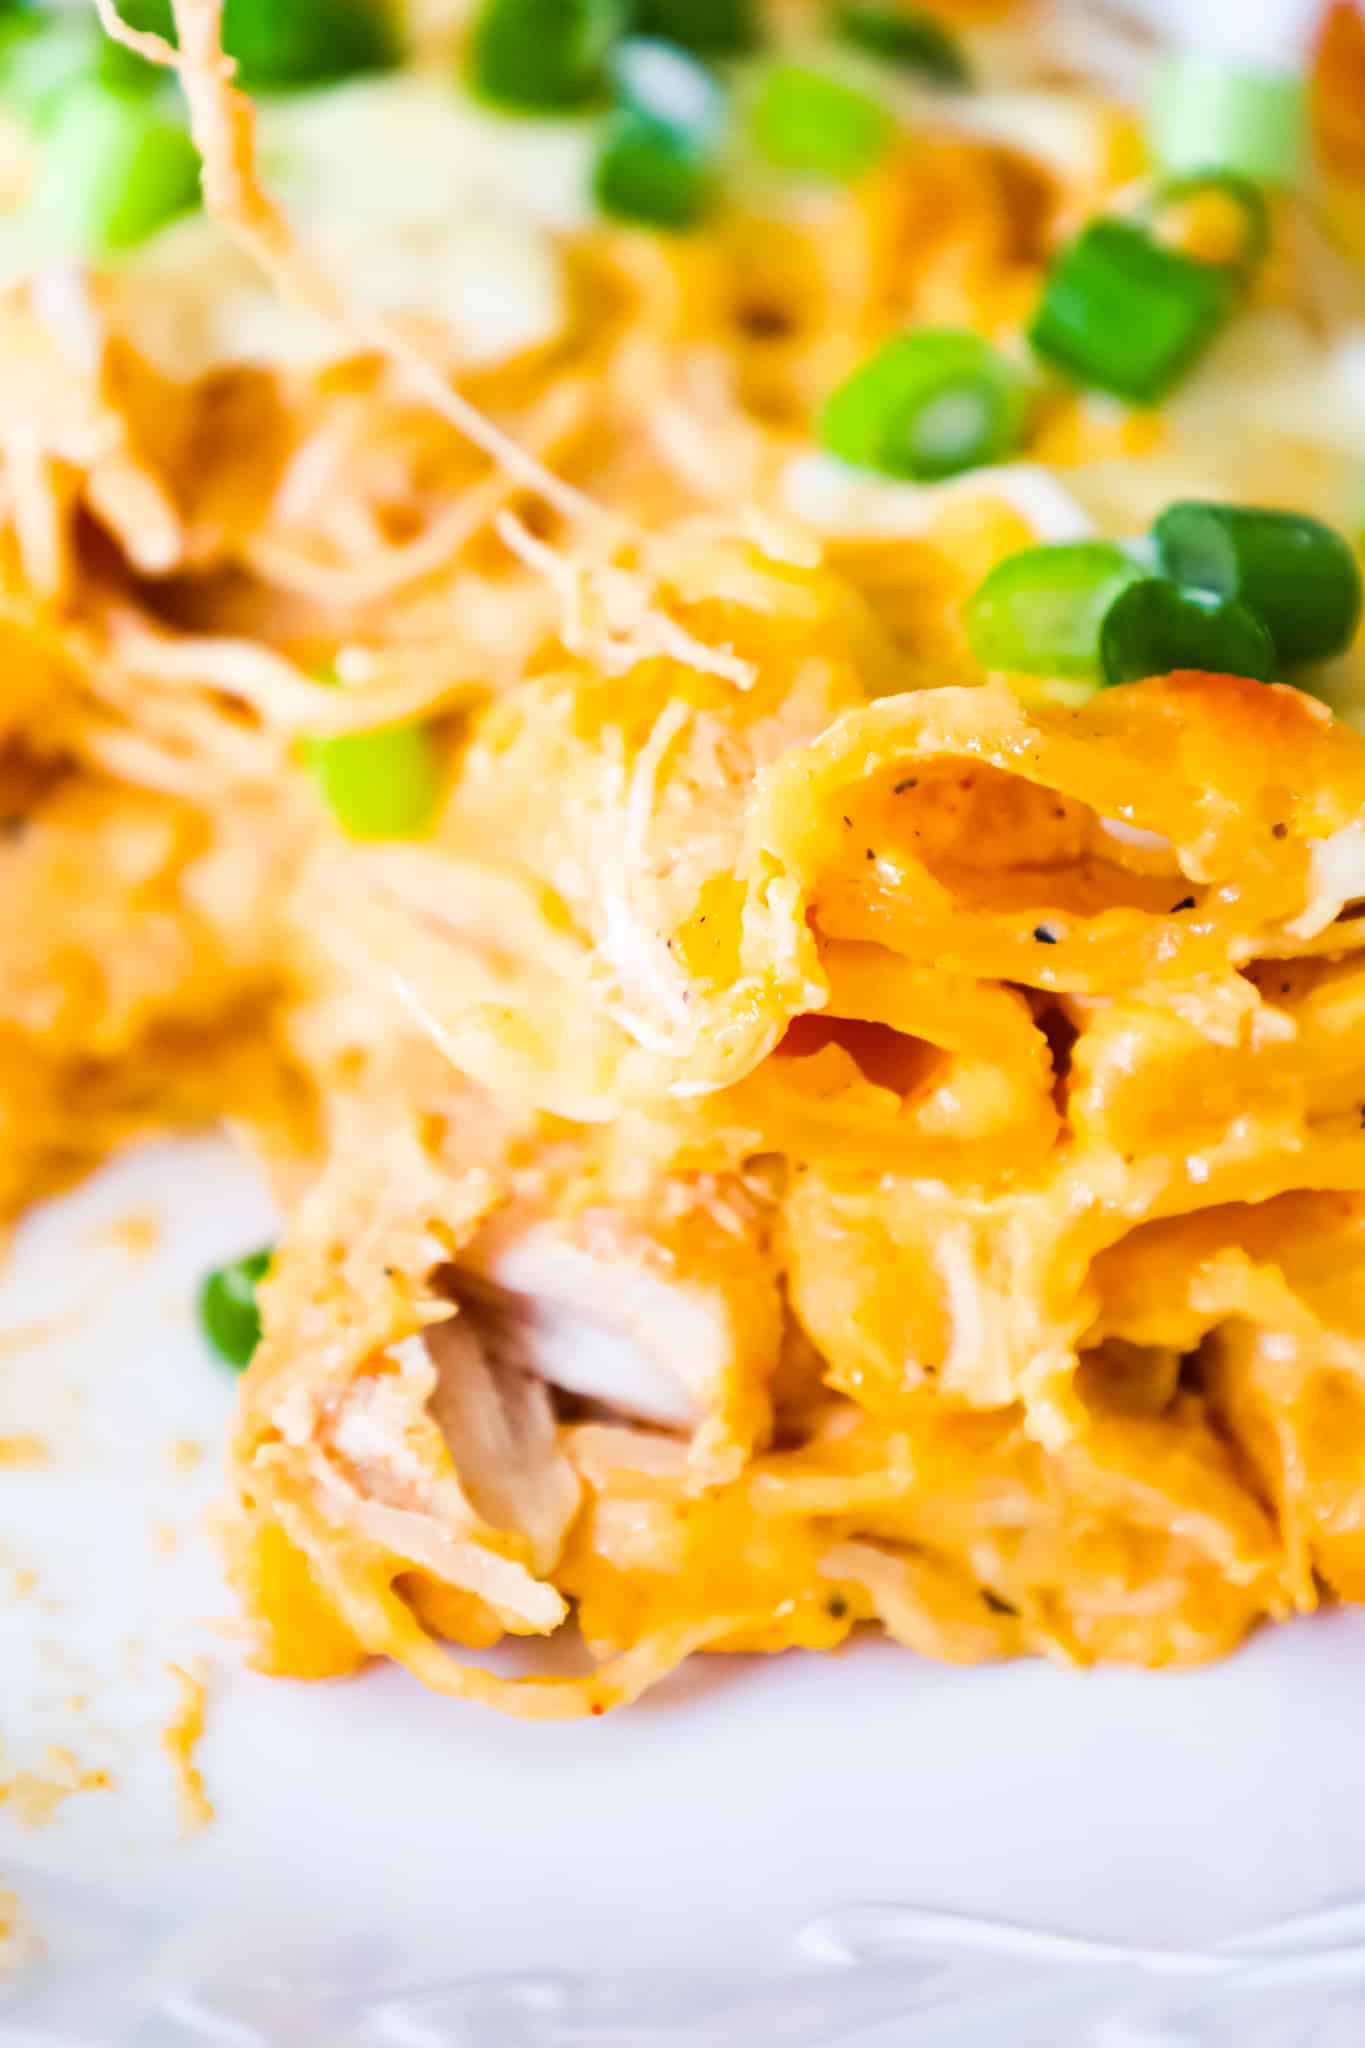 Buffalo Chicken Pasta Bake is a creamy baked penne pasta recipe loaded with shredded rotisserie chicken, cream cheese, Buffalo sauce, ranch dressing, parmesan cheese and mozzarella cheese.